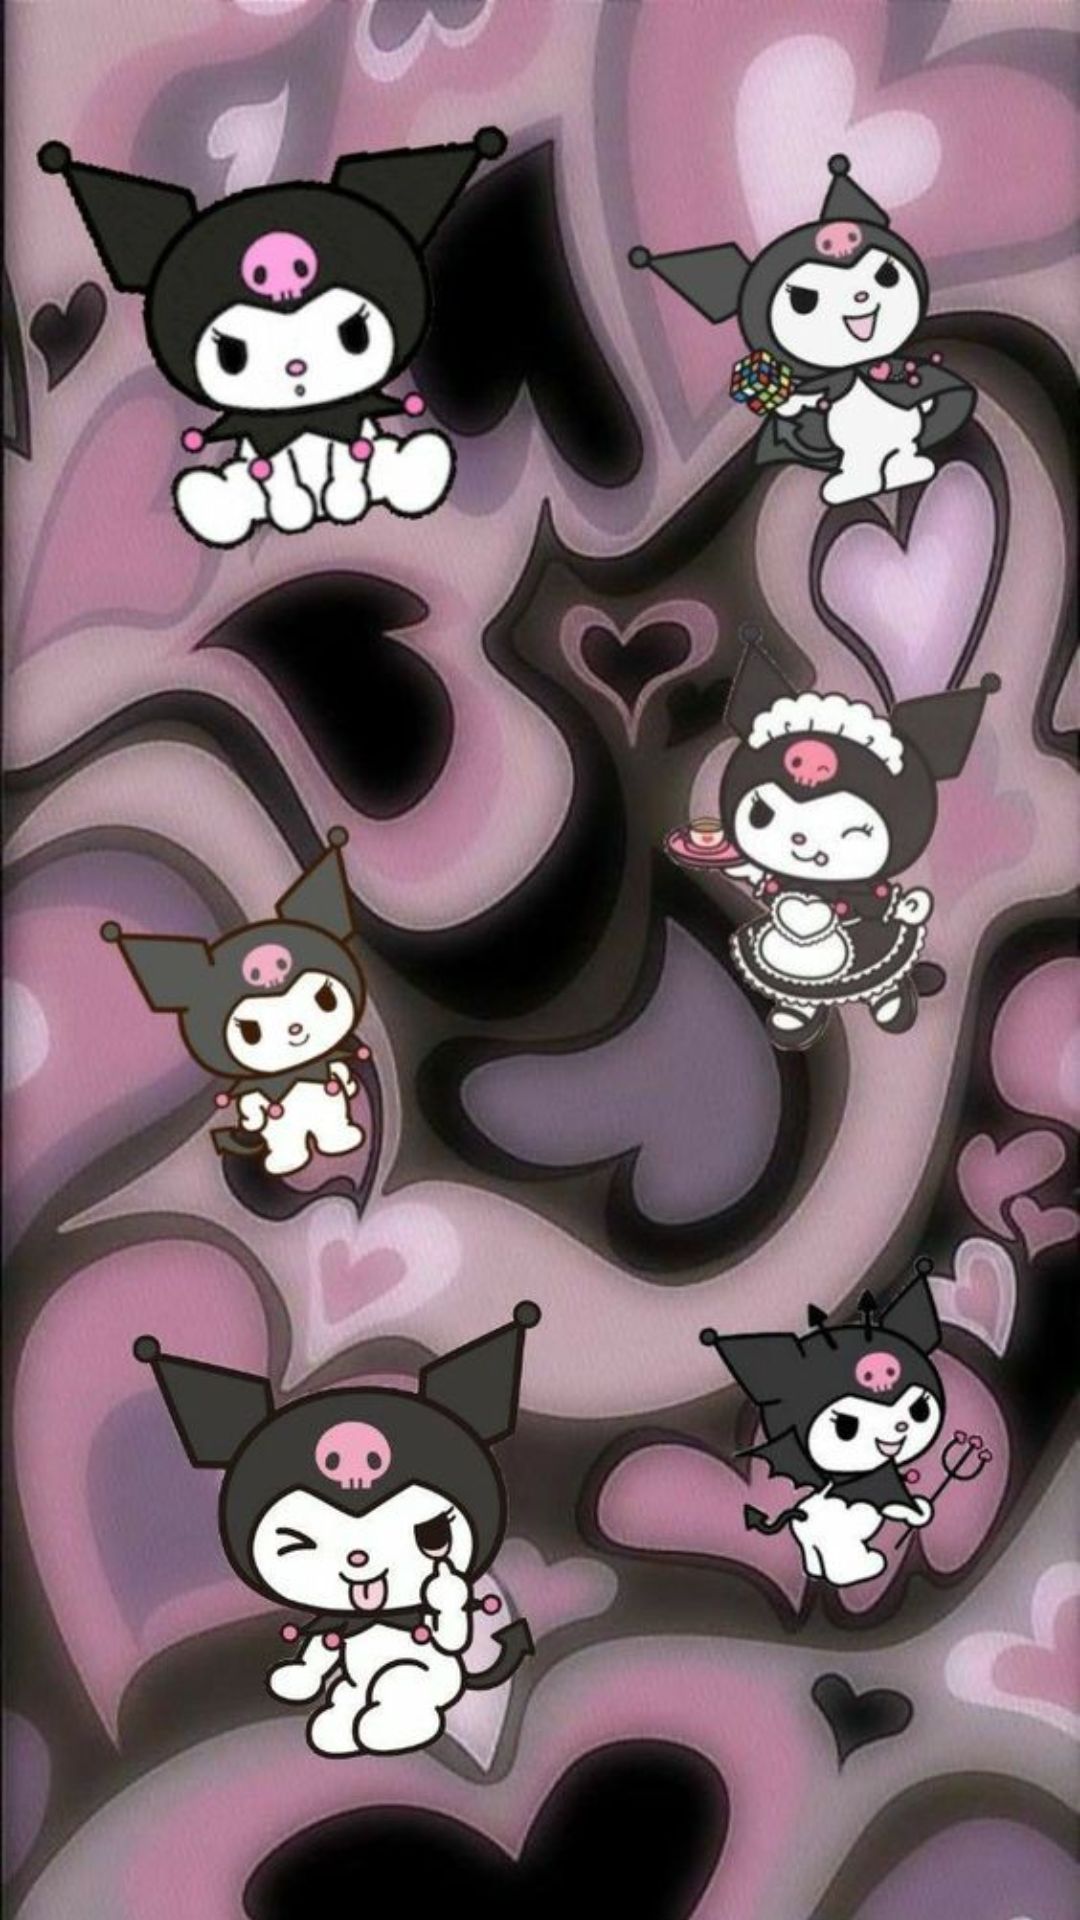 A collection of cute little black and white kittens - Hello Kitty